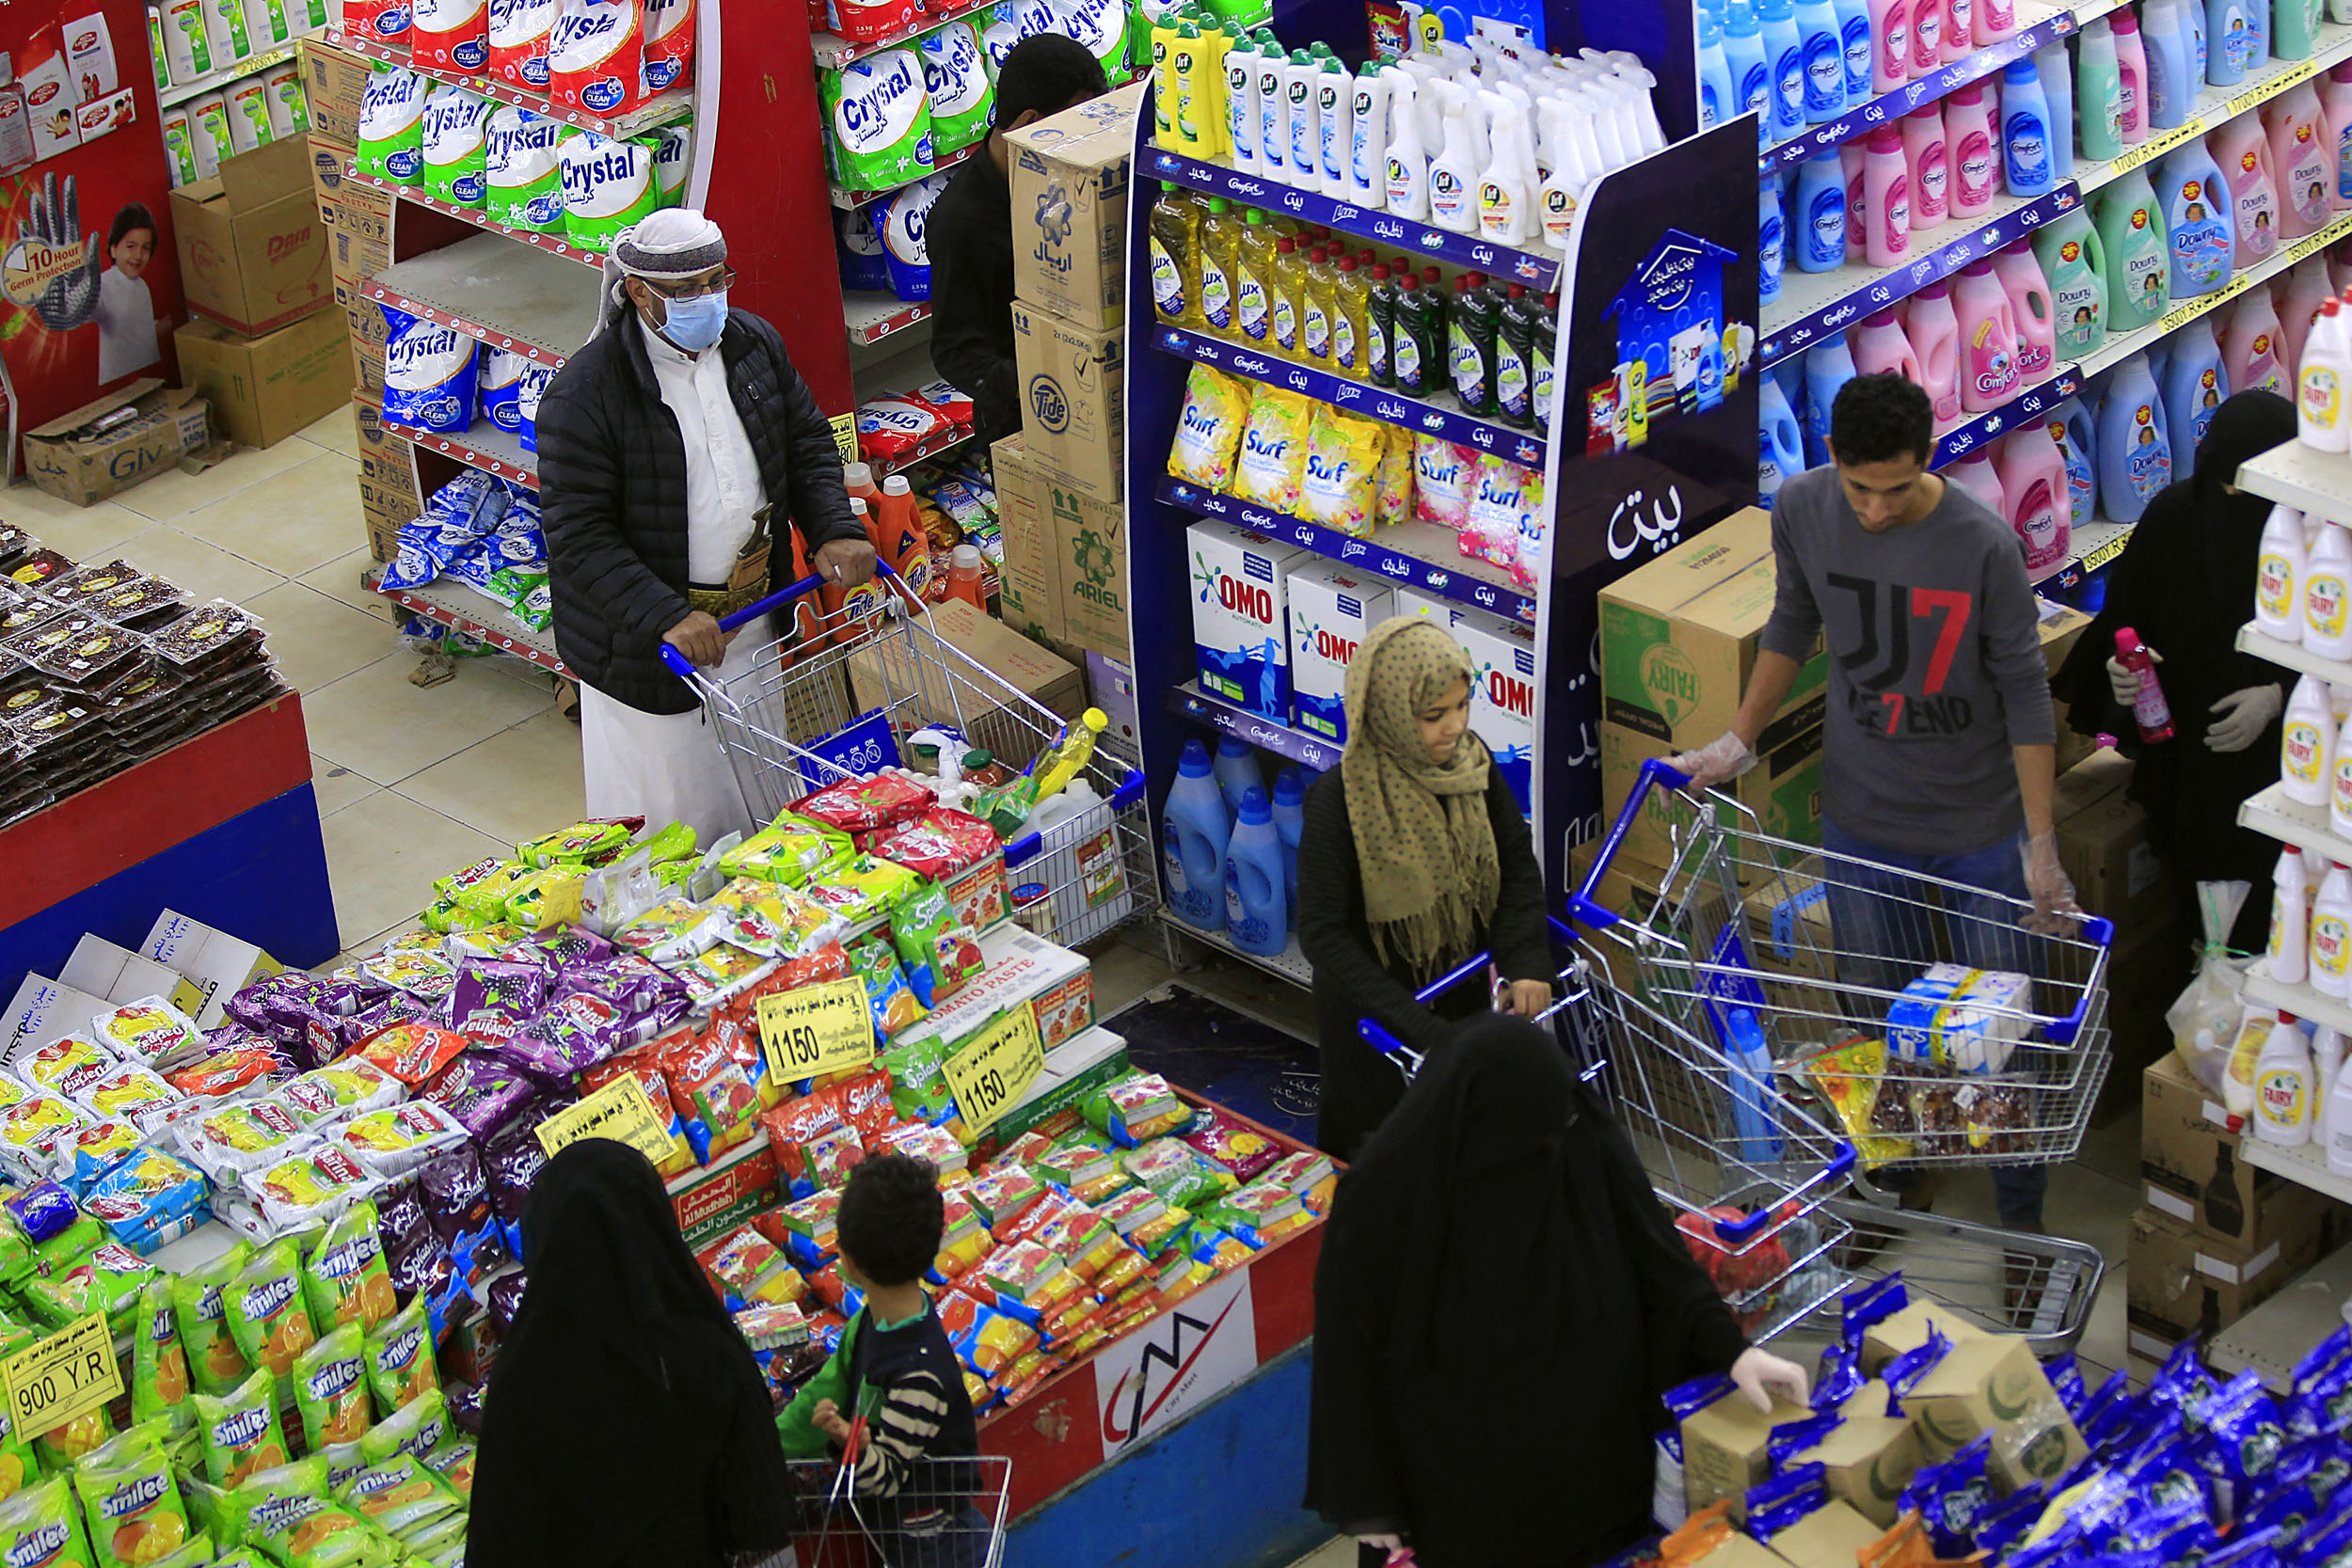 People shop for groceries and supplies at a supermarket in Yemen's capital Sanaa on April 6, 2021, as they prepare a week ahead of the Muslim holy fasting month of Ramadan. (Photo by MOHAMMED HUWAIS / AFP)